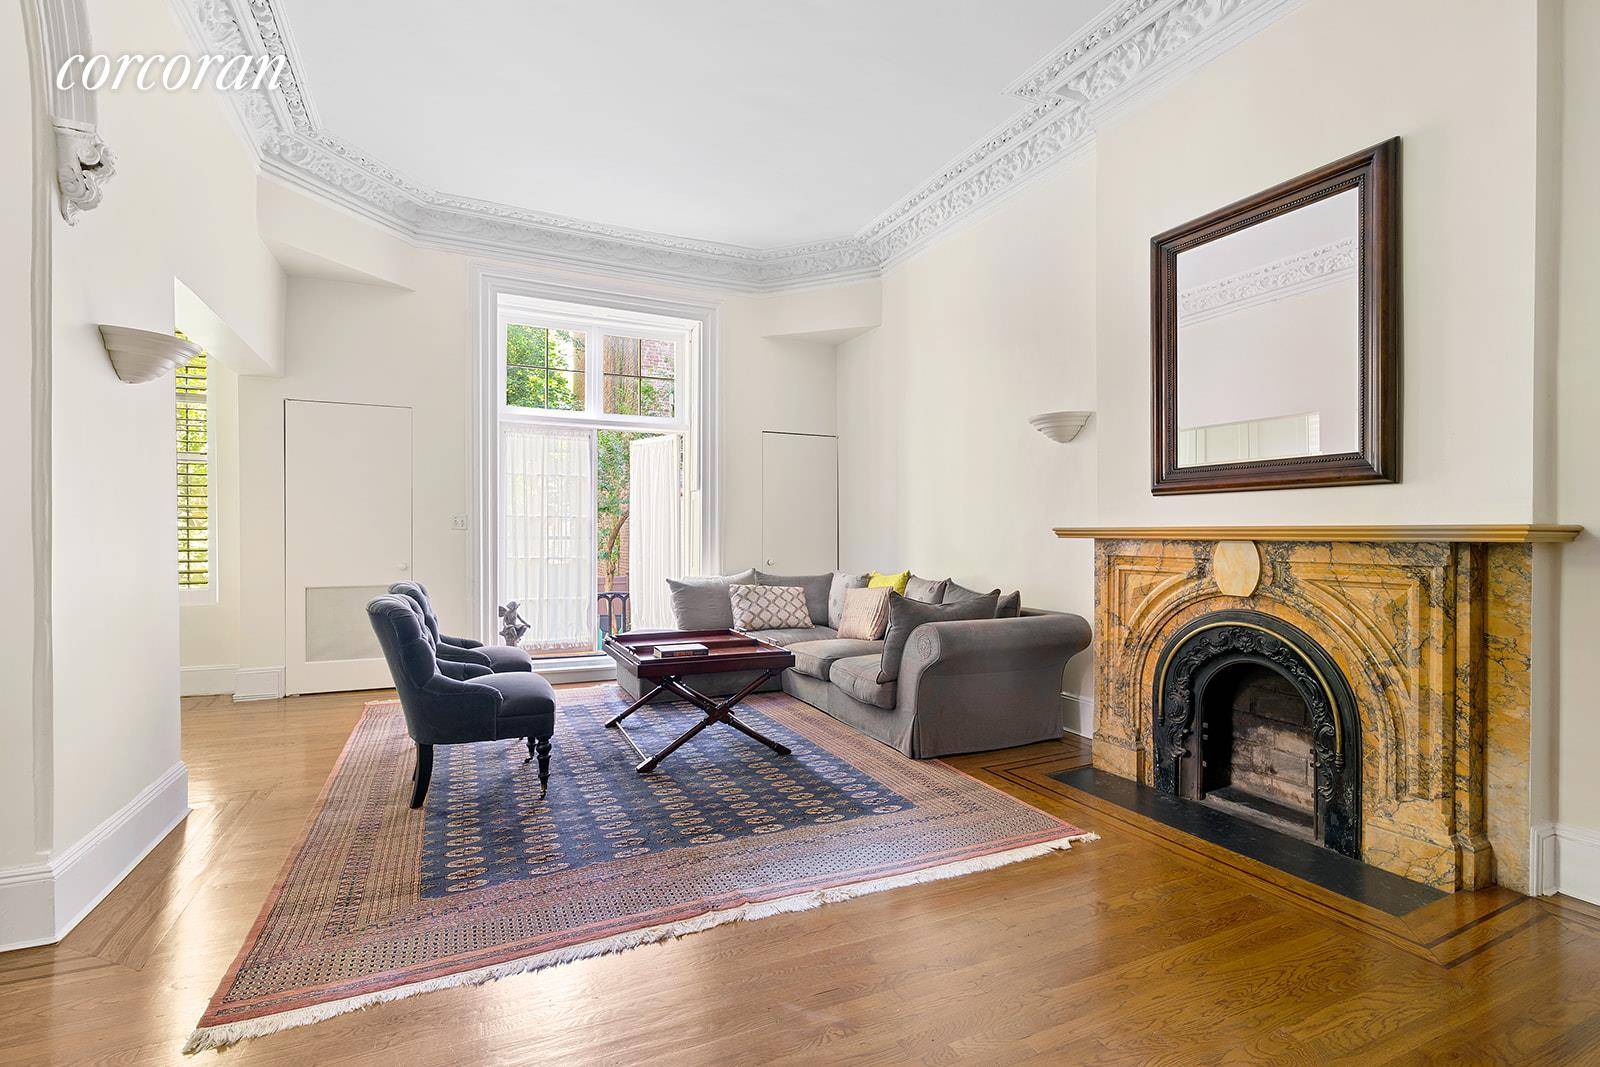 This is the quintessential Brooklyn Heights three bedroom home that you have been waiting for, with no compromises on space, location, drama, elegance, and your very own HUGE private garden.